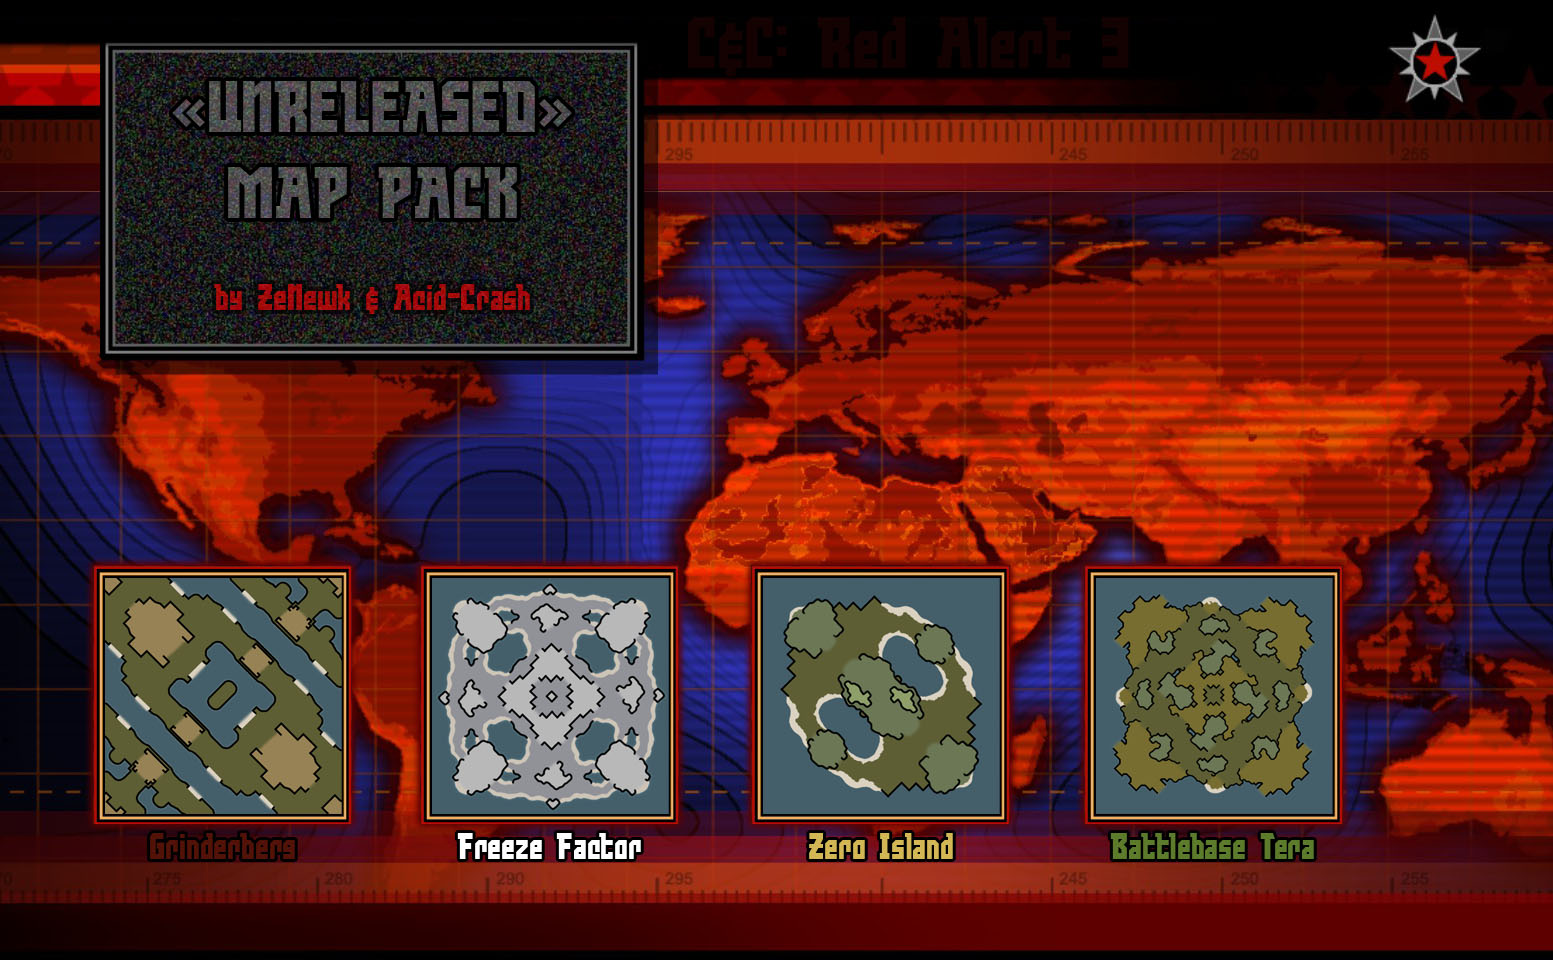 How To Install Language Pack For Red Alert 3